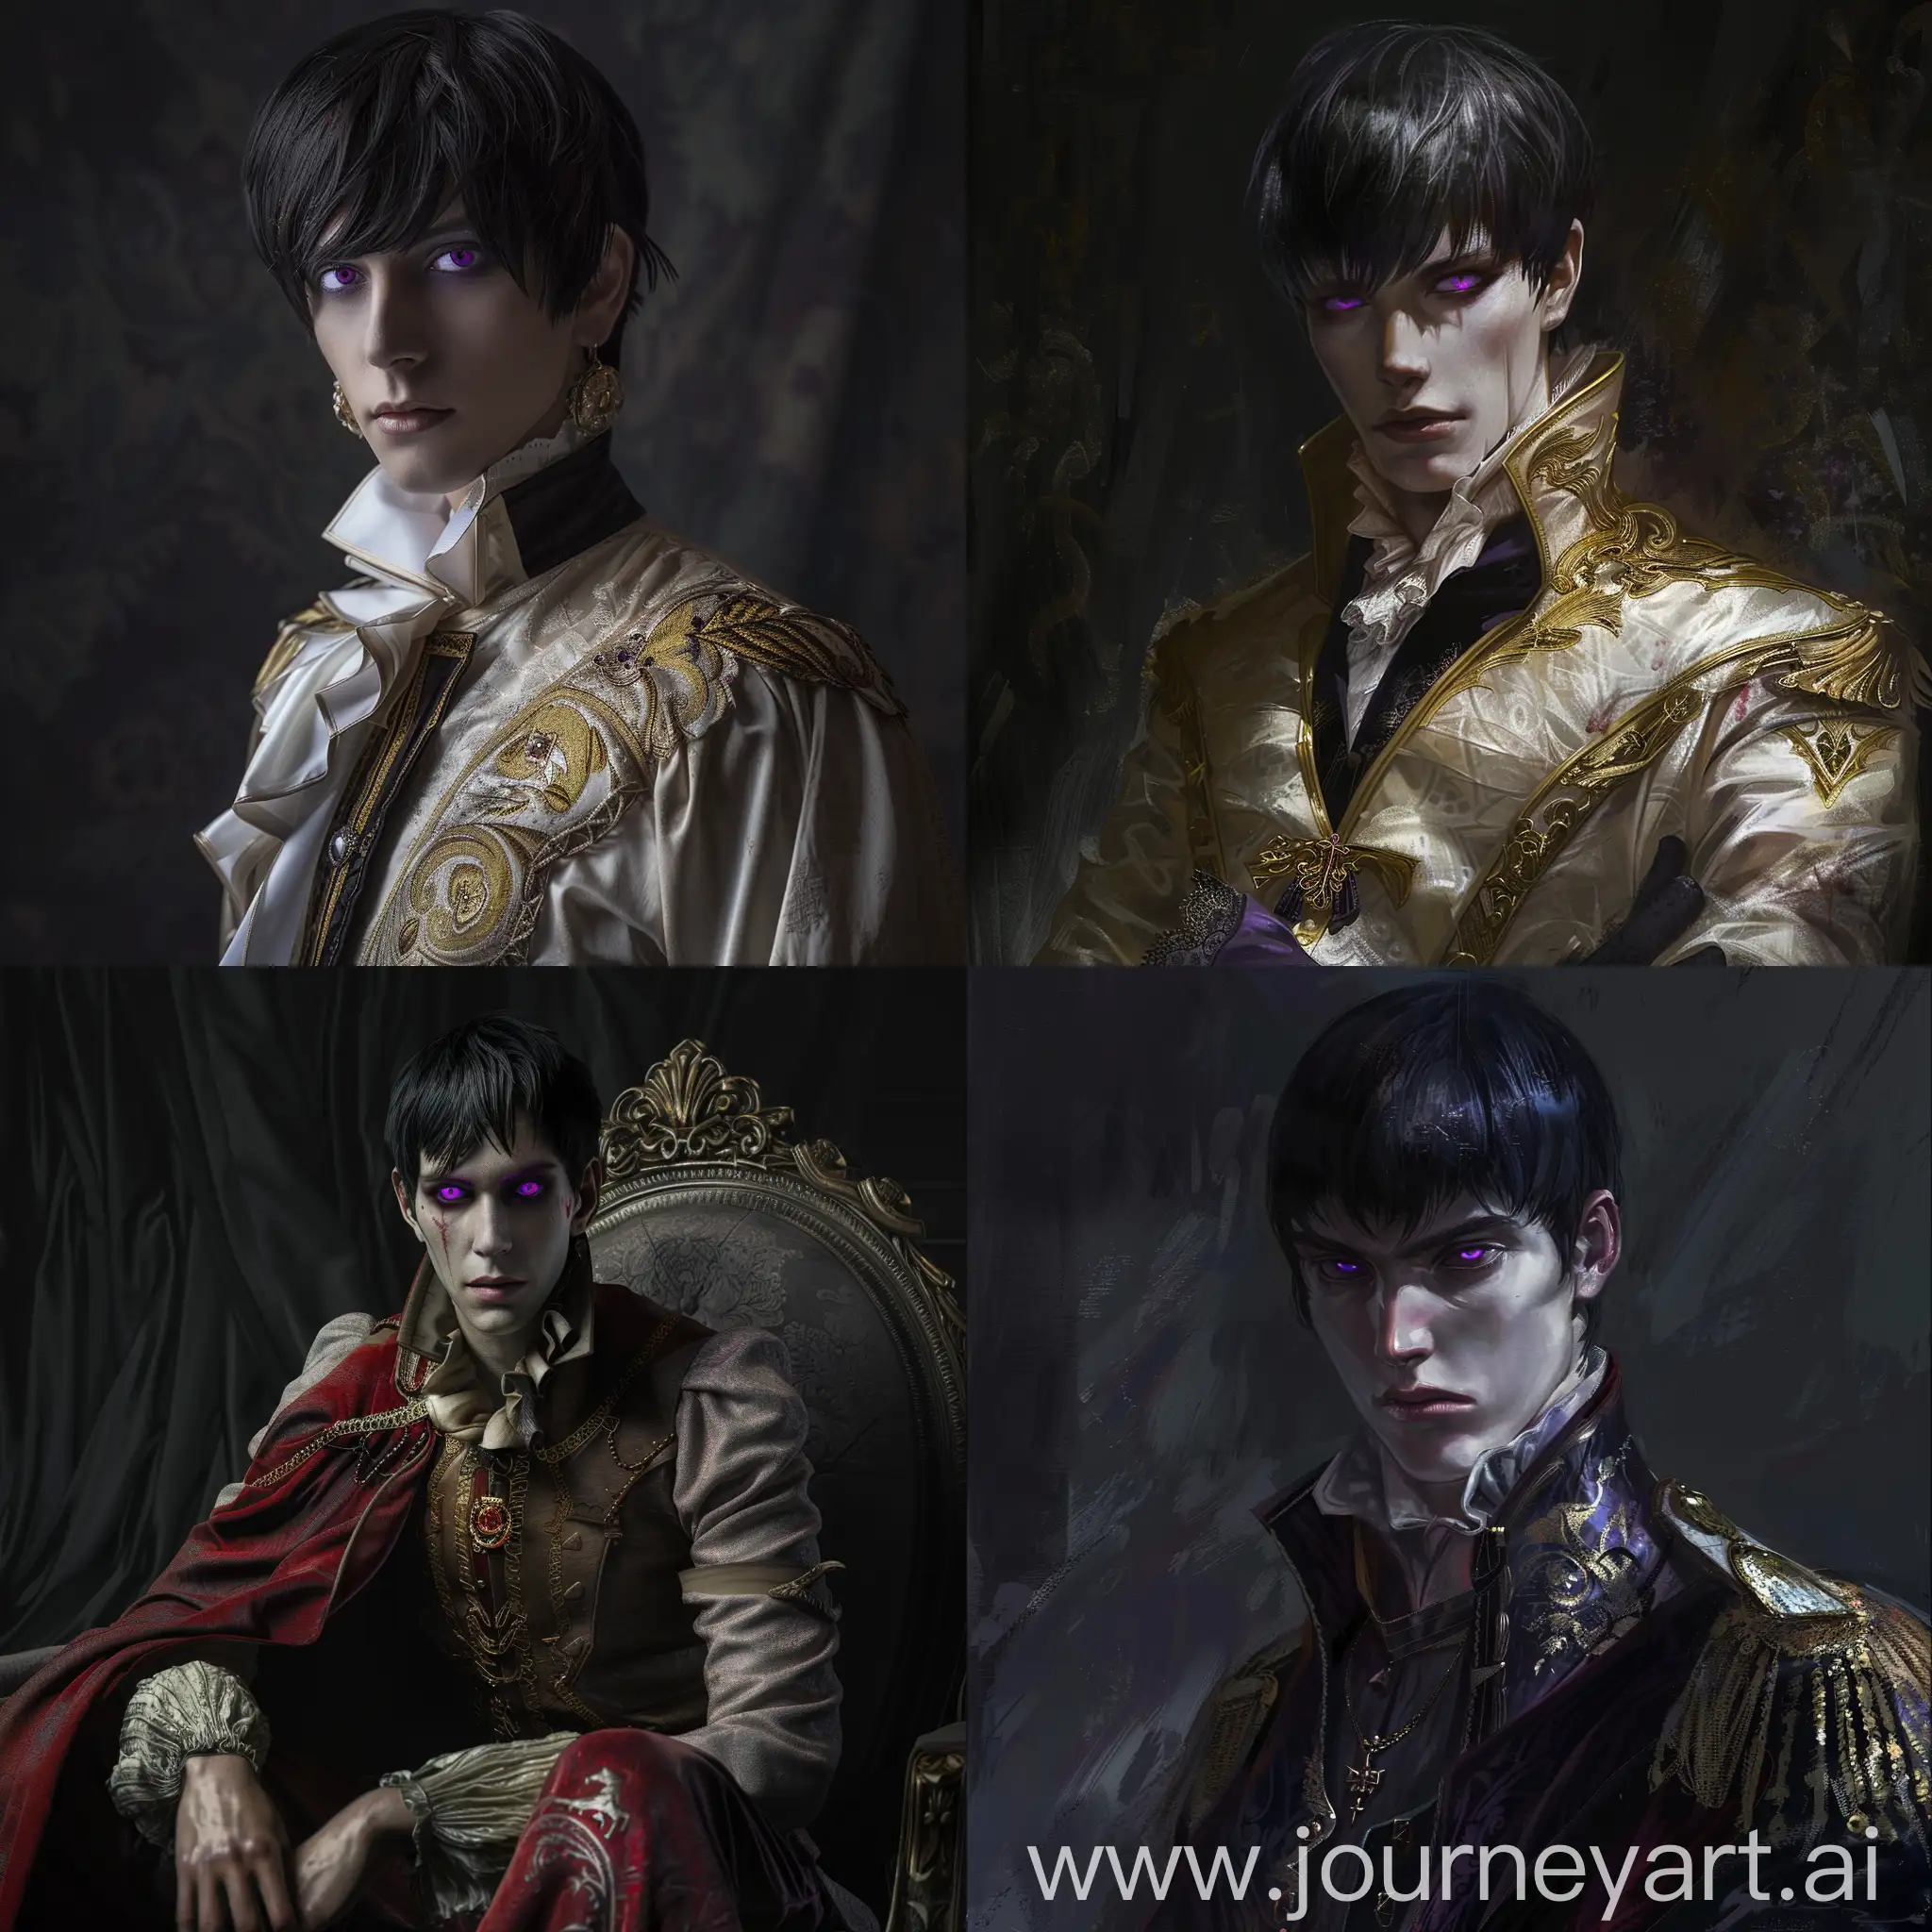 Aristocratic-Man-with-Haughty-Pose-and-Purple-Eyes-on-Dark-Background